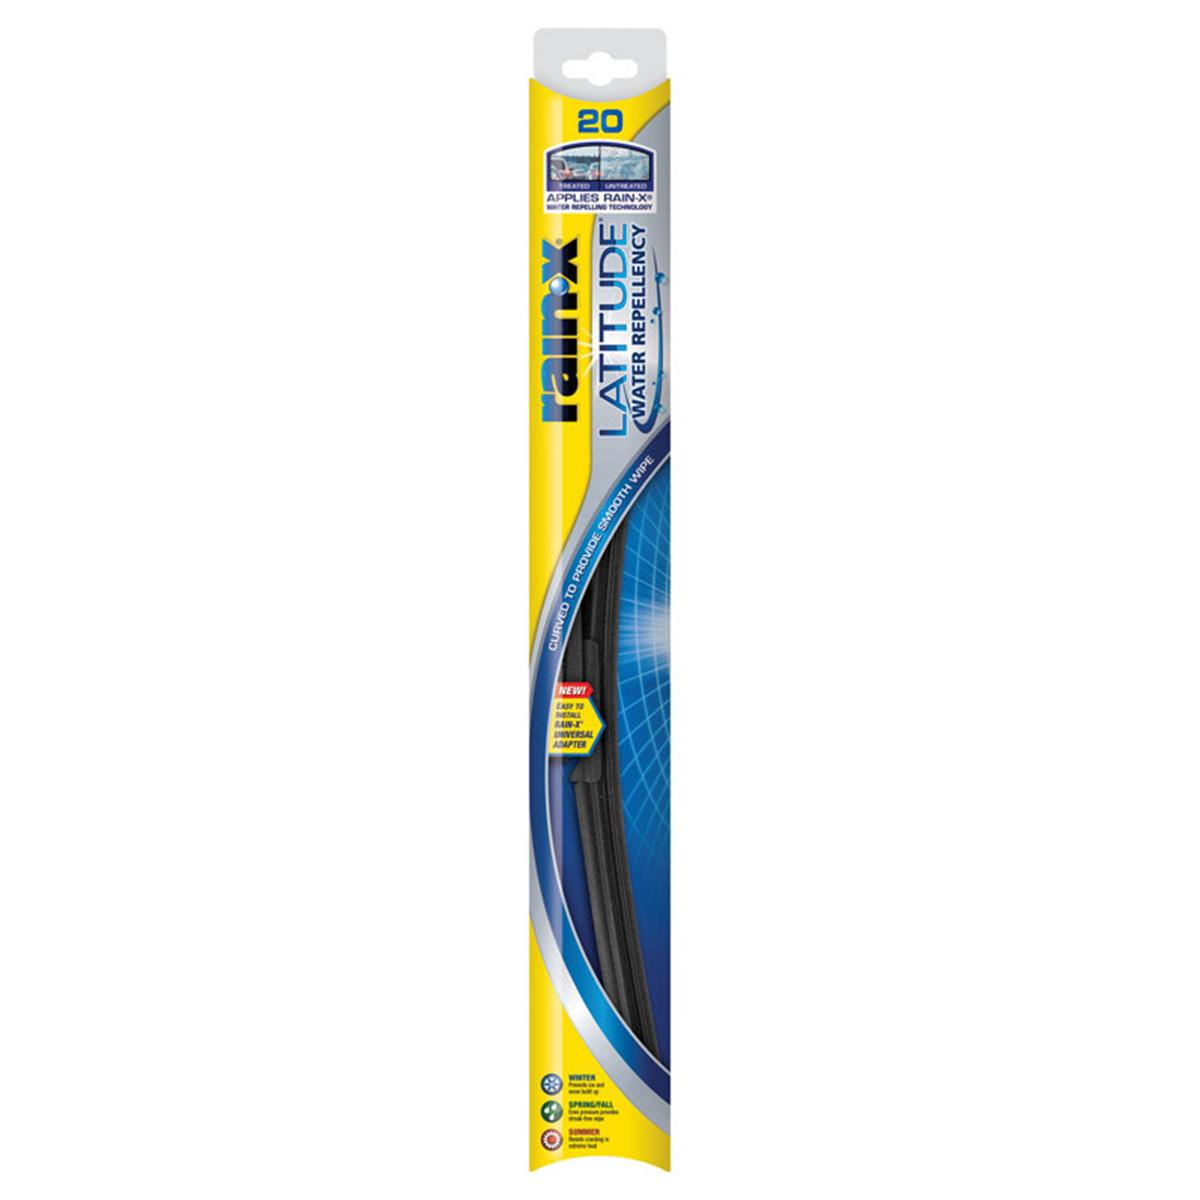 Picture of Itw Global Brands 5079277-2 20 in. Rain-X Latitude Wiper Blade